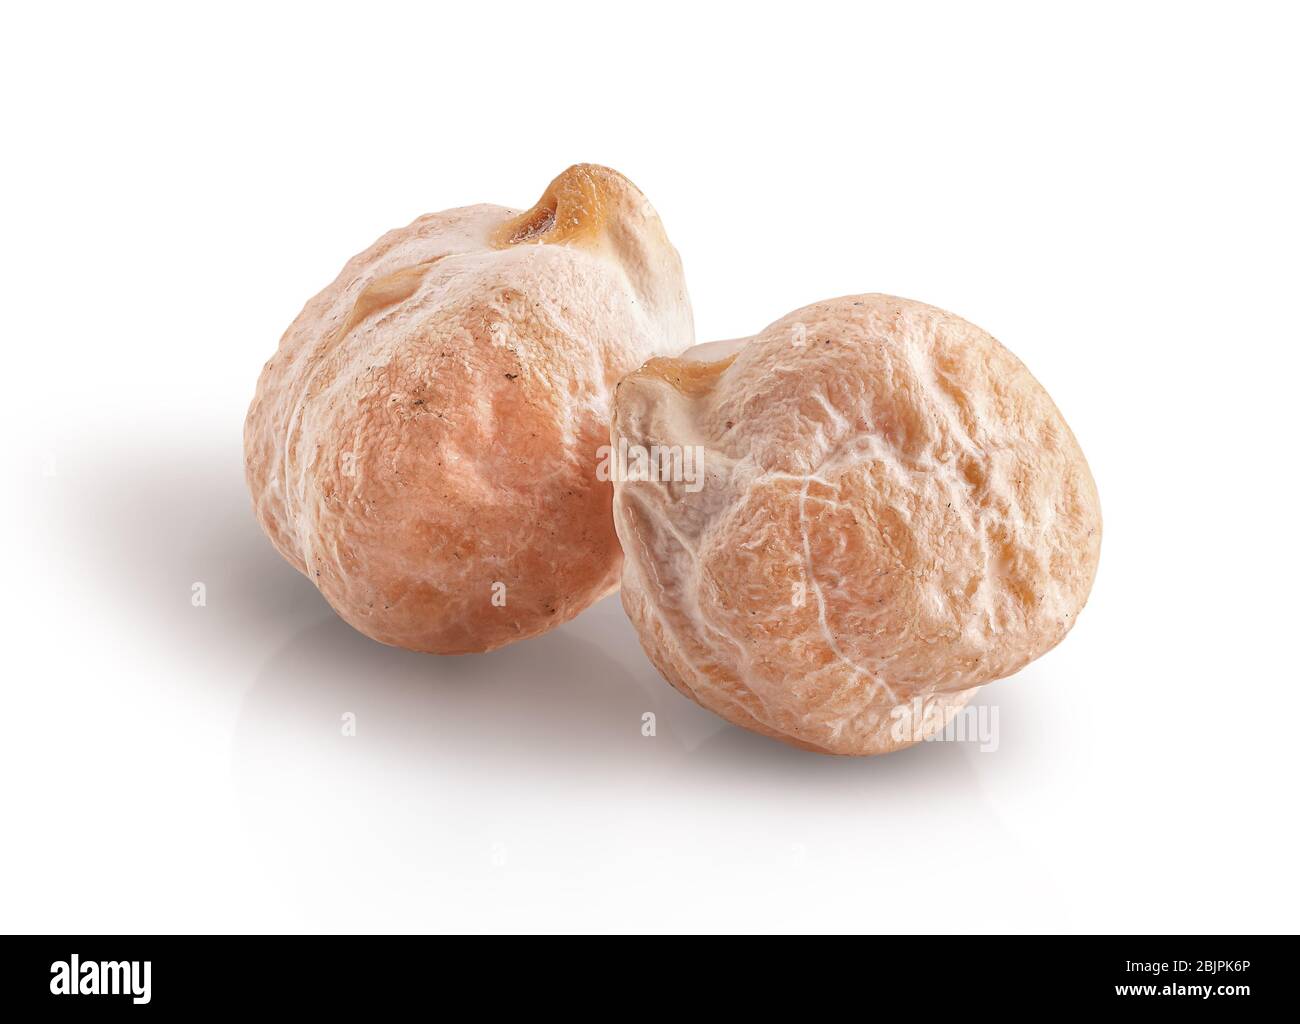 Two whole dry chickpeas closeup Stock Photo